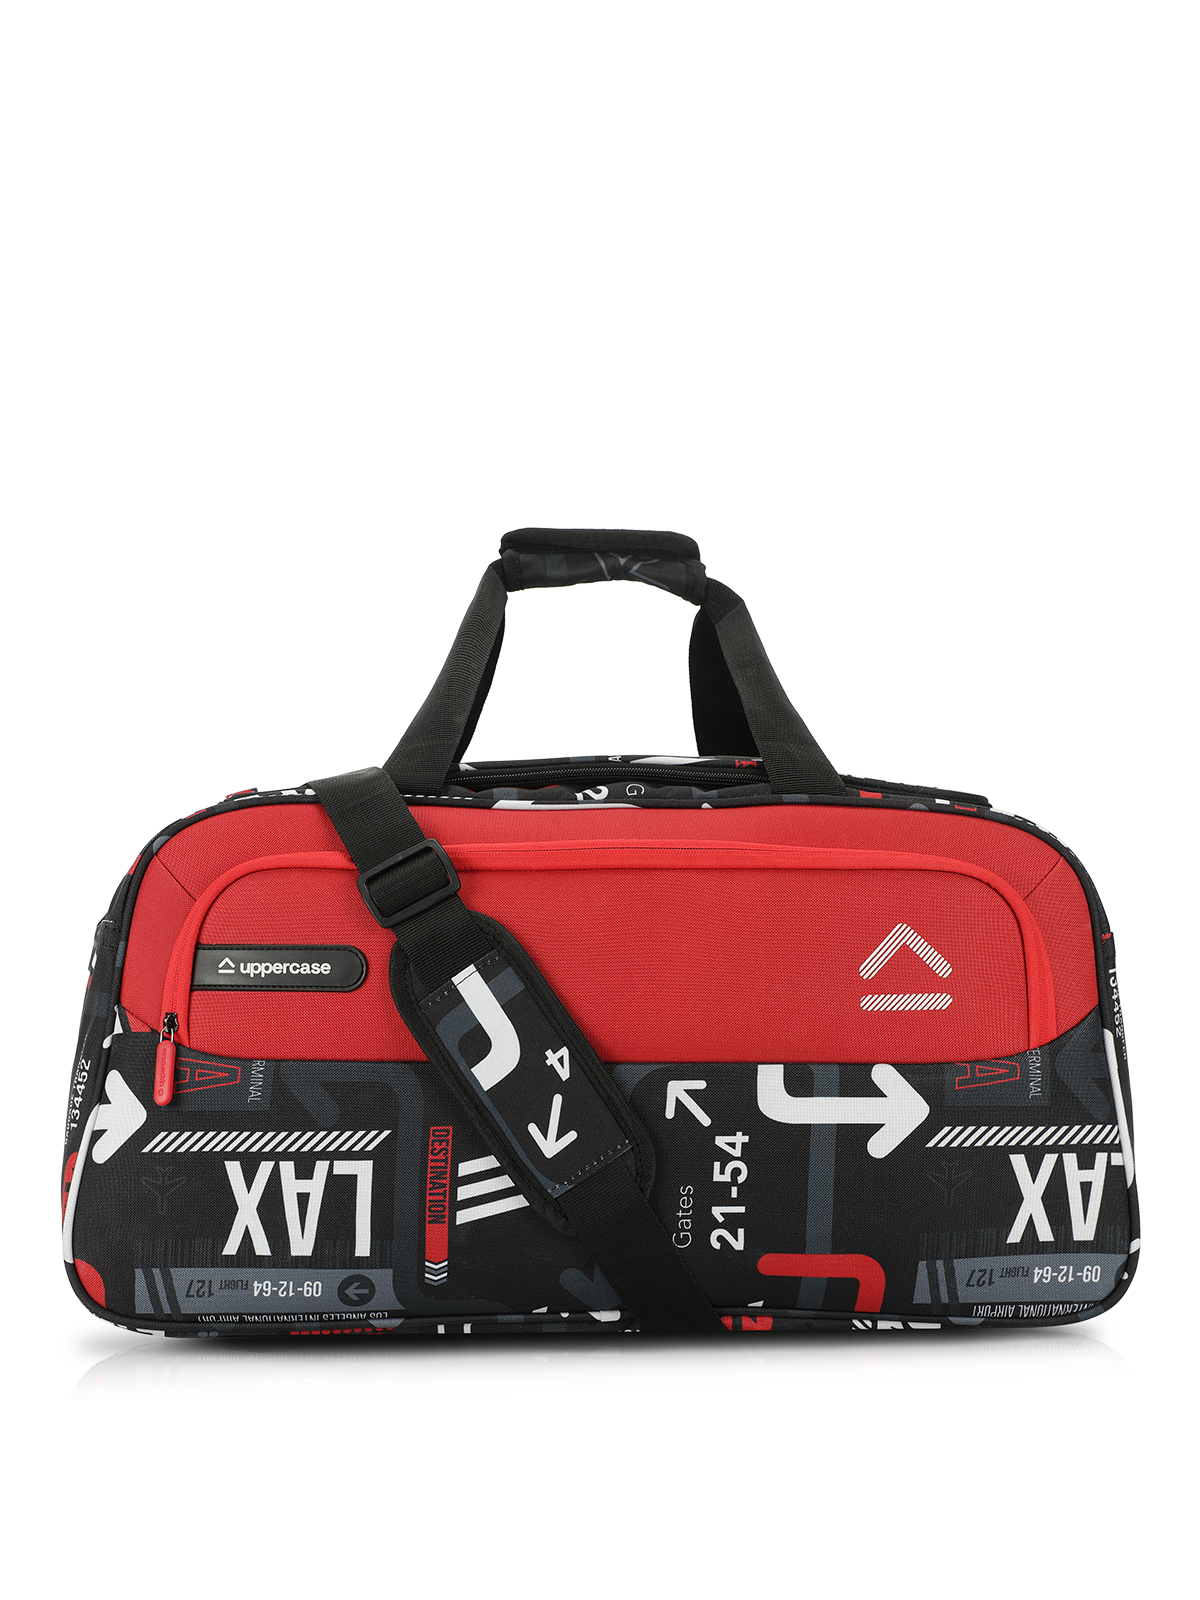 Branded Duffle Bag - Red and Pink Duffle Bags